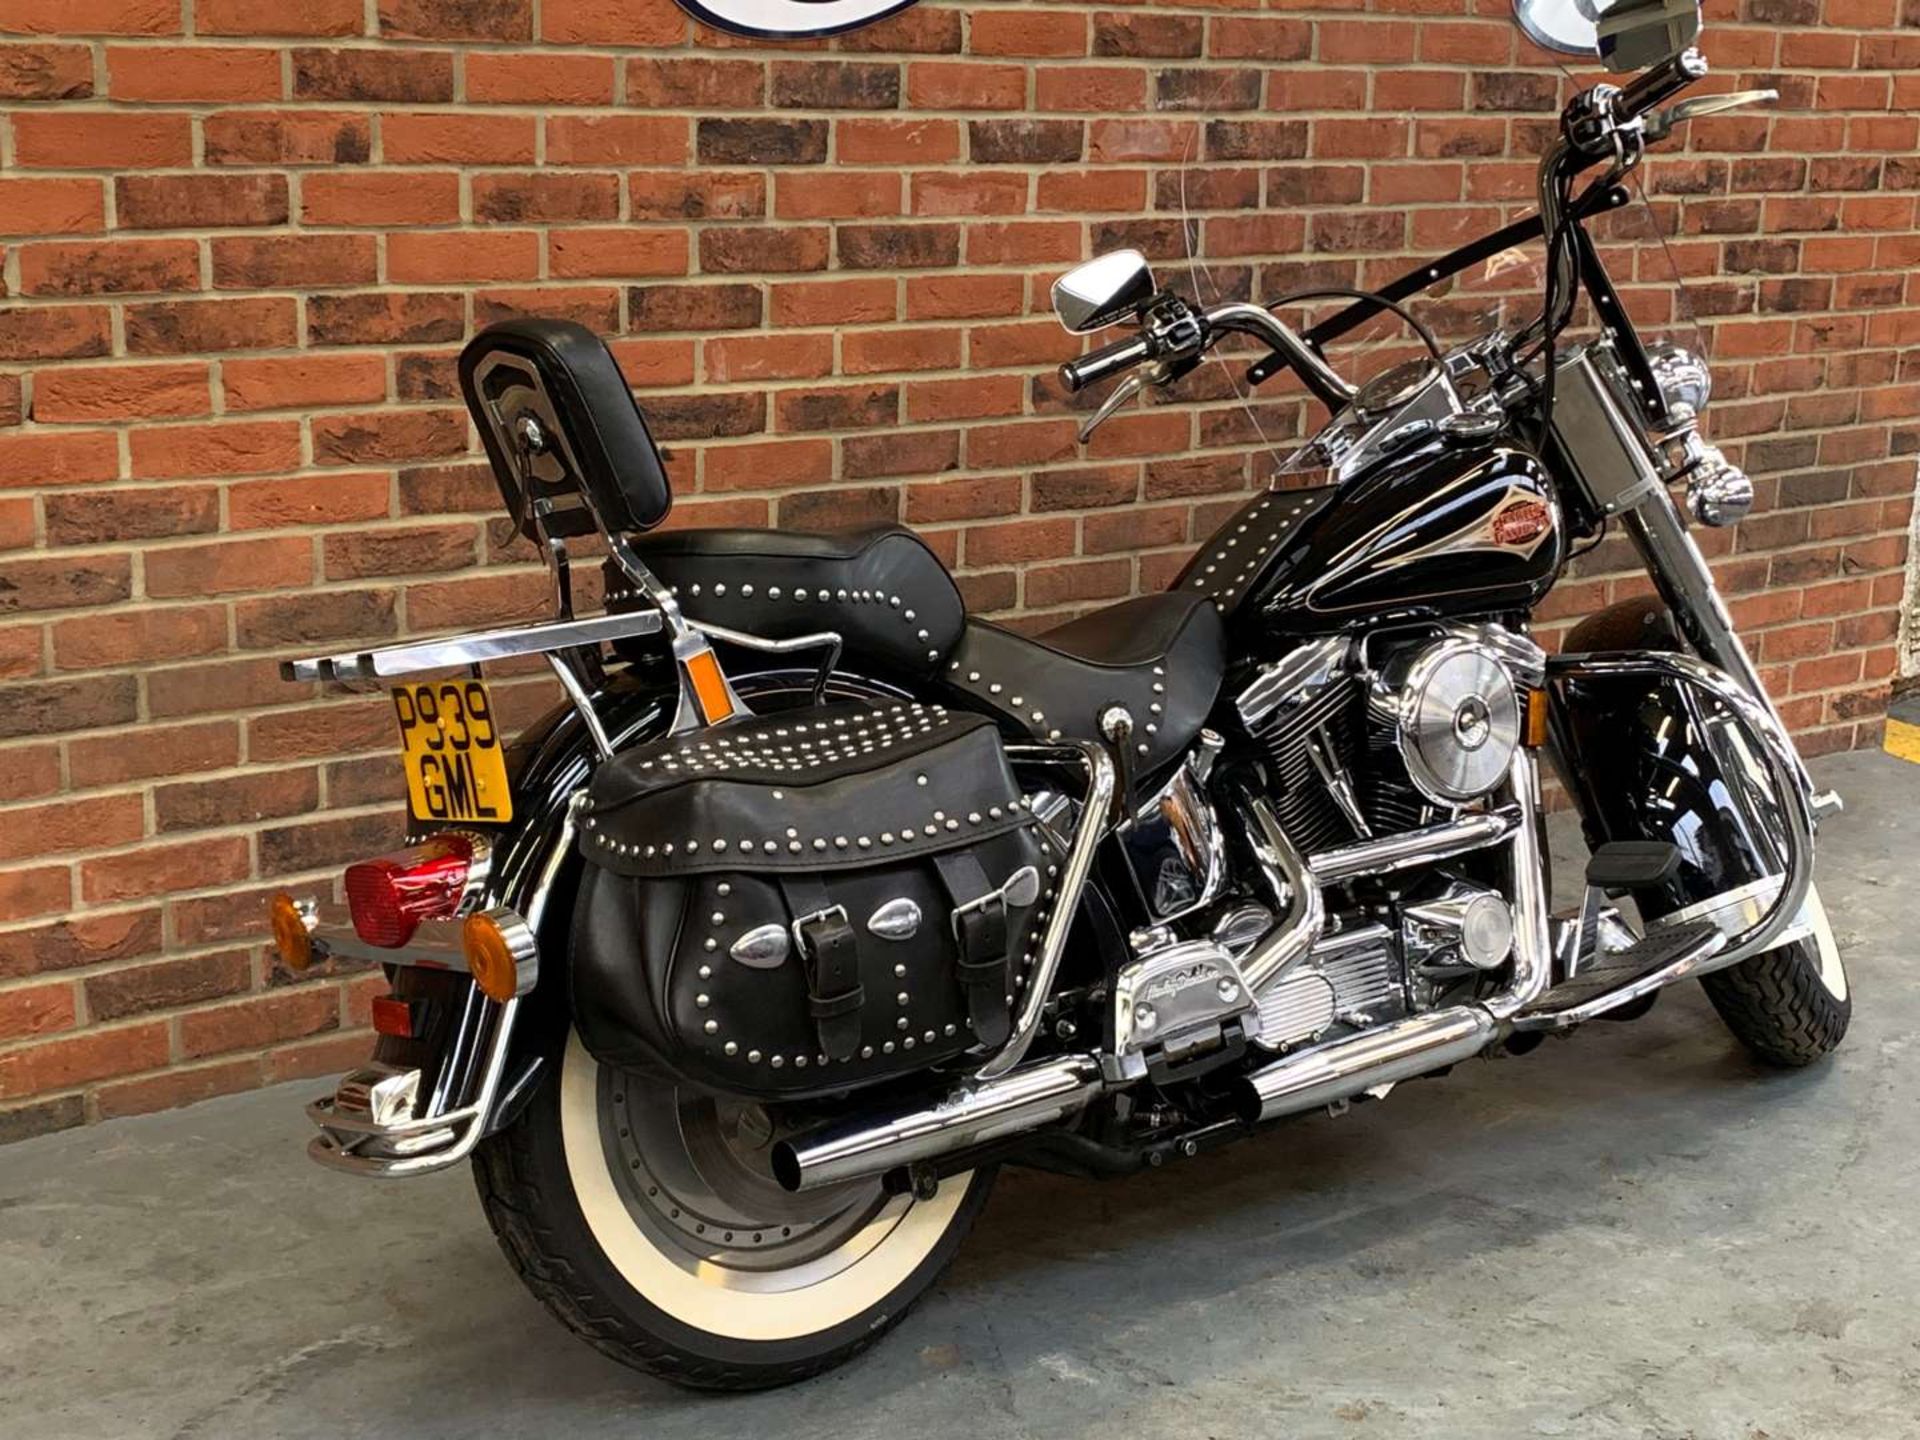 1996 HARLEY DAVIDSON FLSTC ONE OWNER FROM NEW - Image 2 of 22